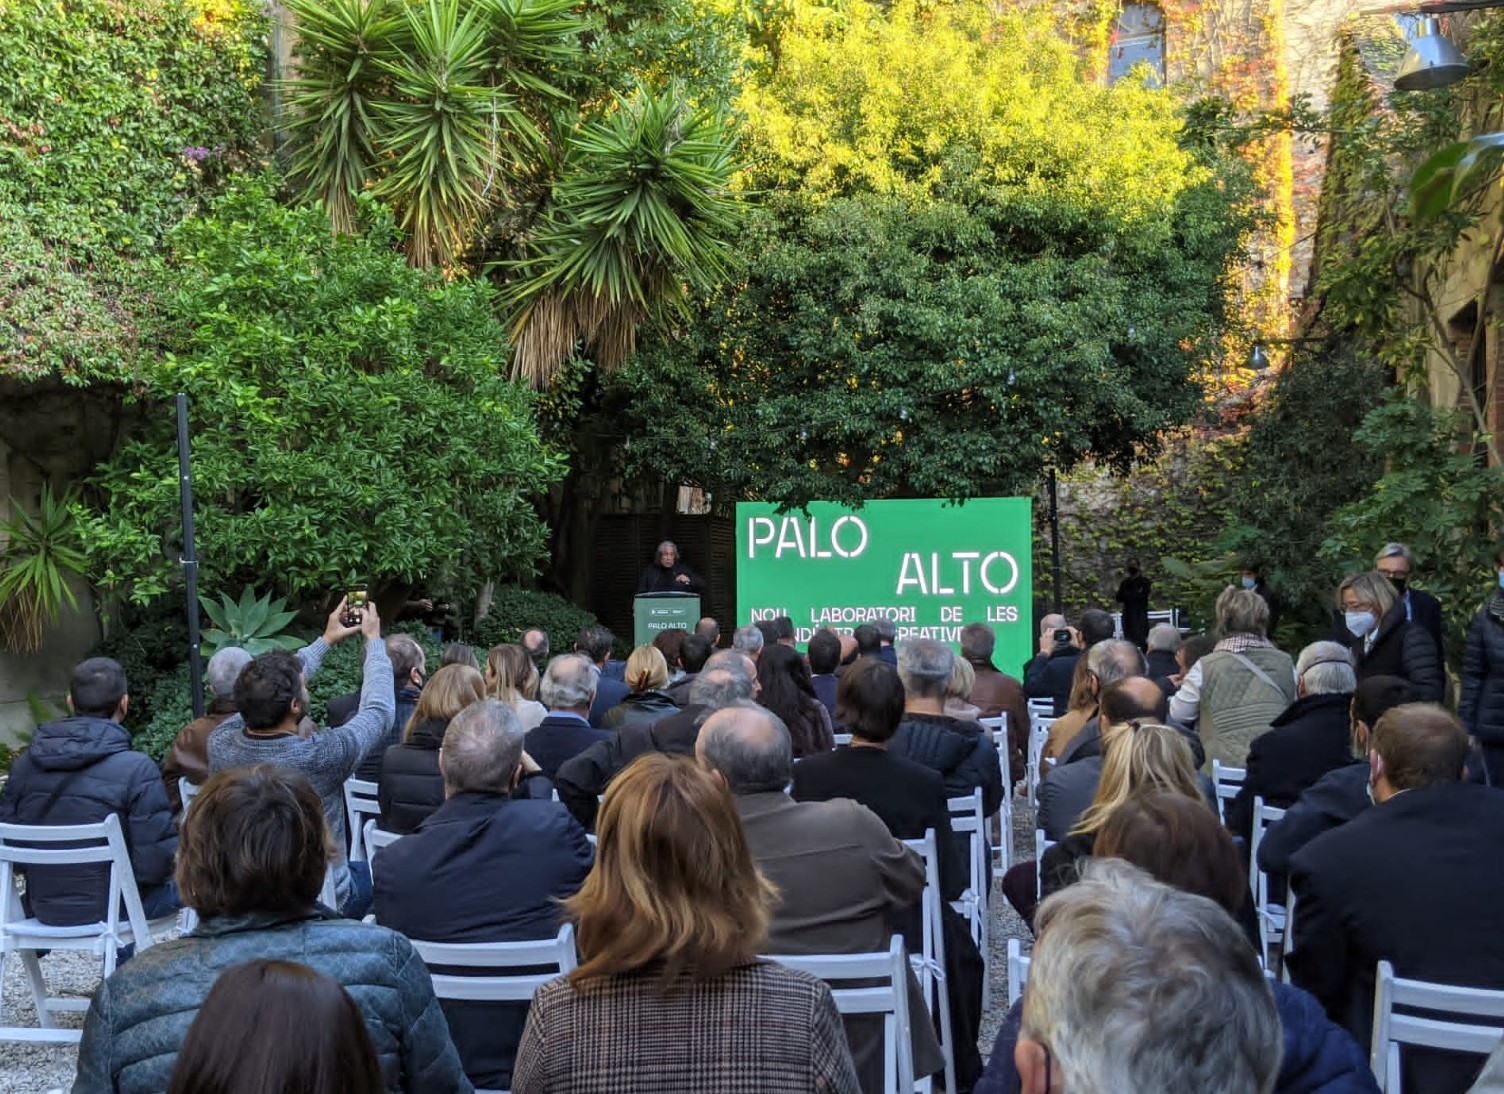 Barcelona Activa is collaborating in the creation of a new space for entrepreneurship in the audiovisual and new technologies sector in the Poblenou area